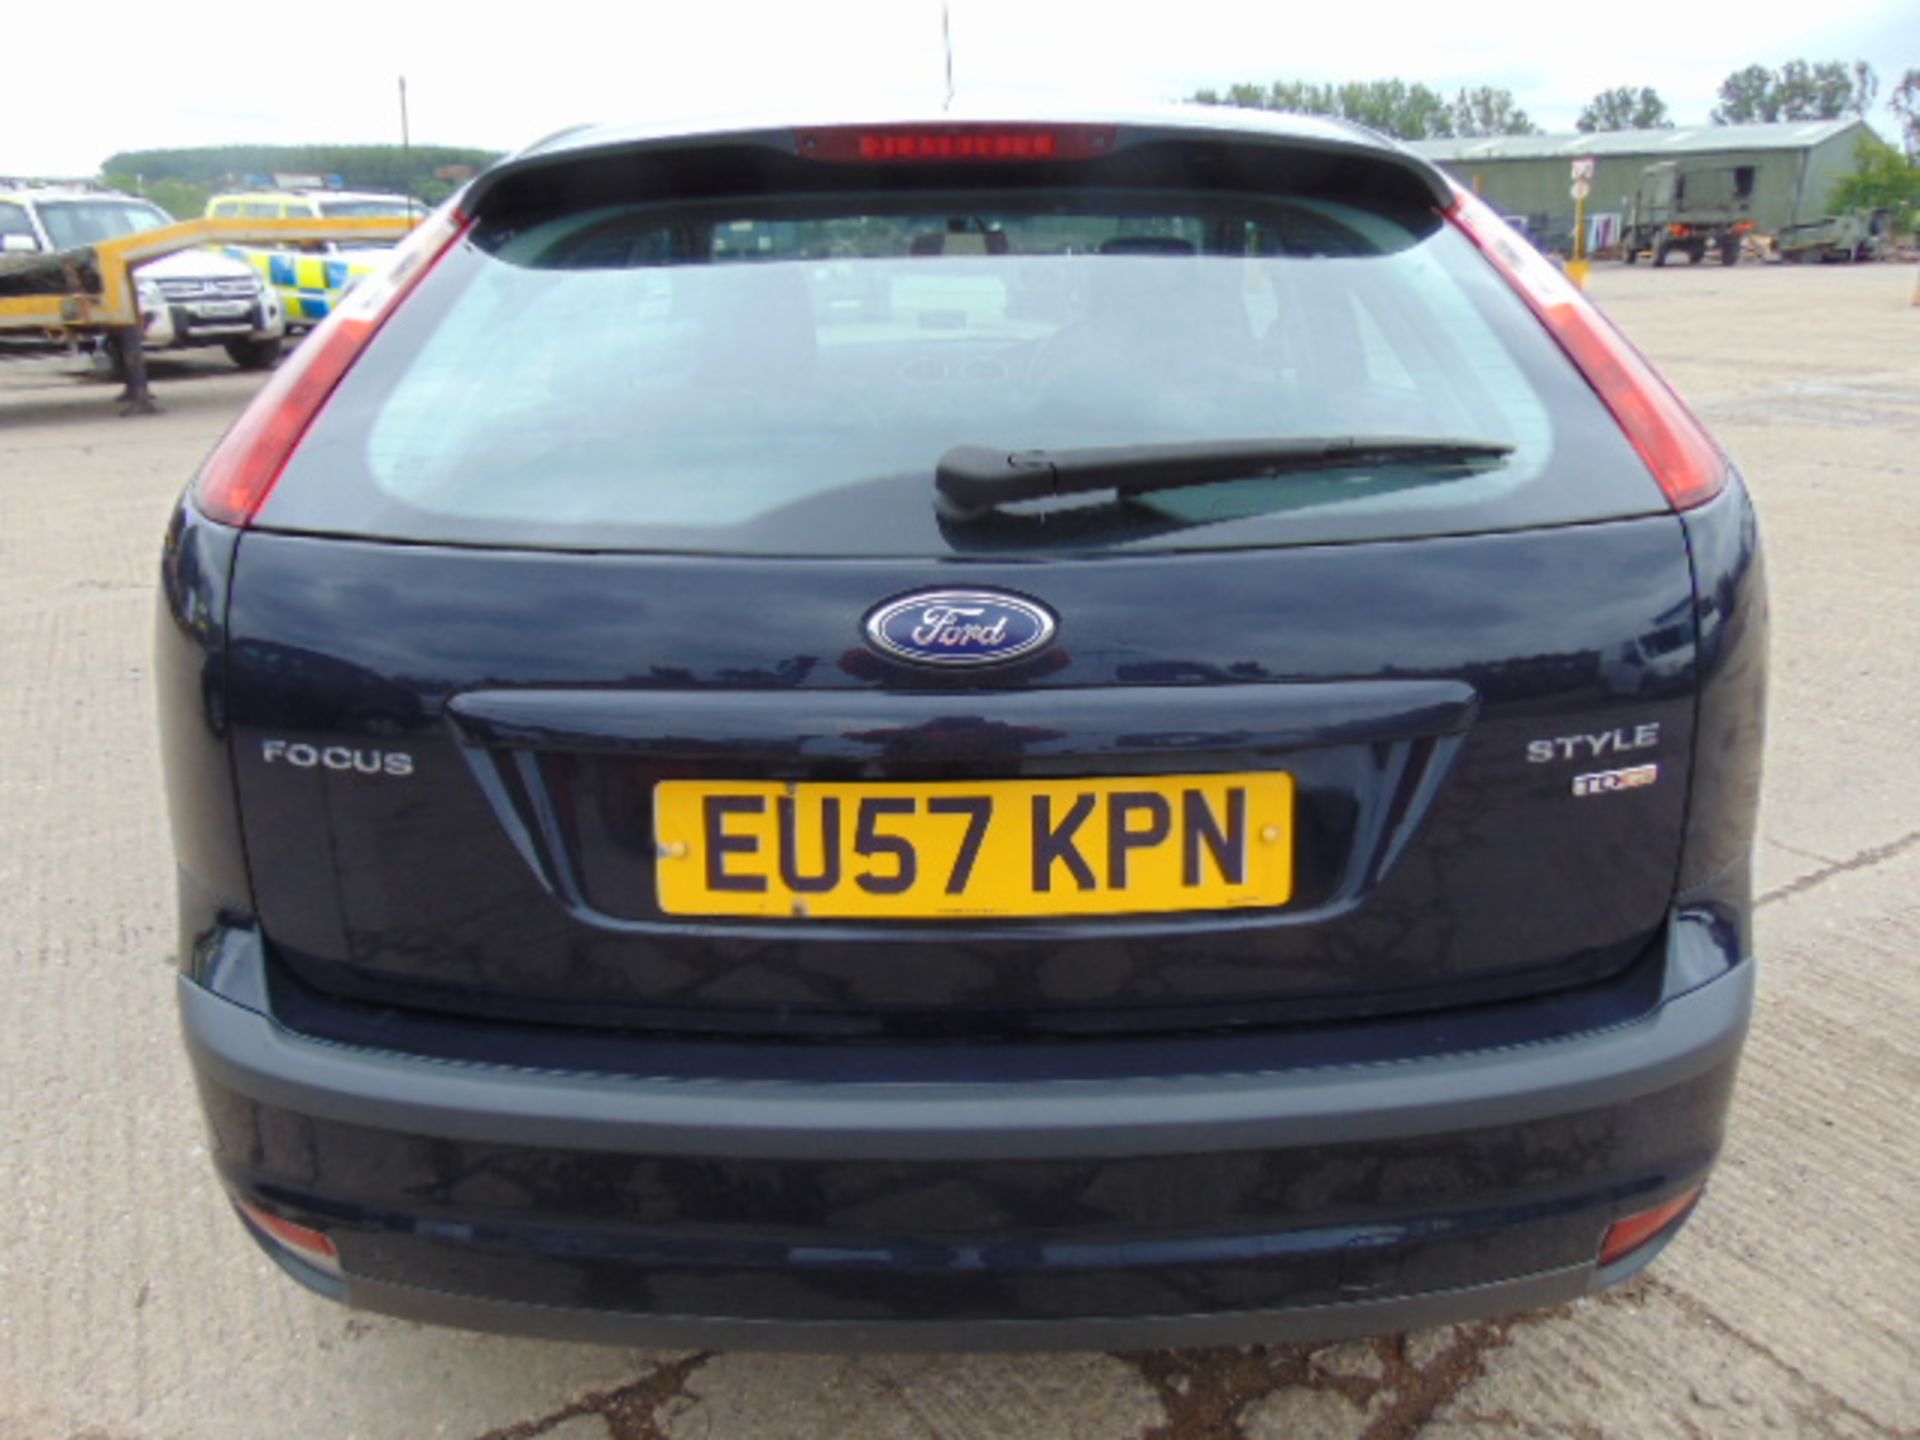 2008 Ford Focus 1.8 TDCI Style Hatchback - Image 7 of 18